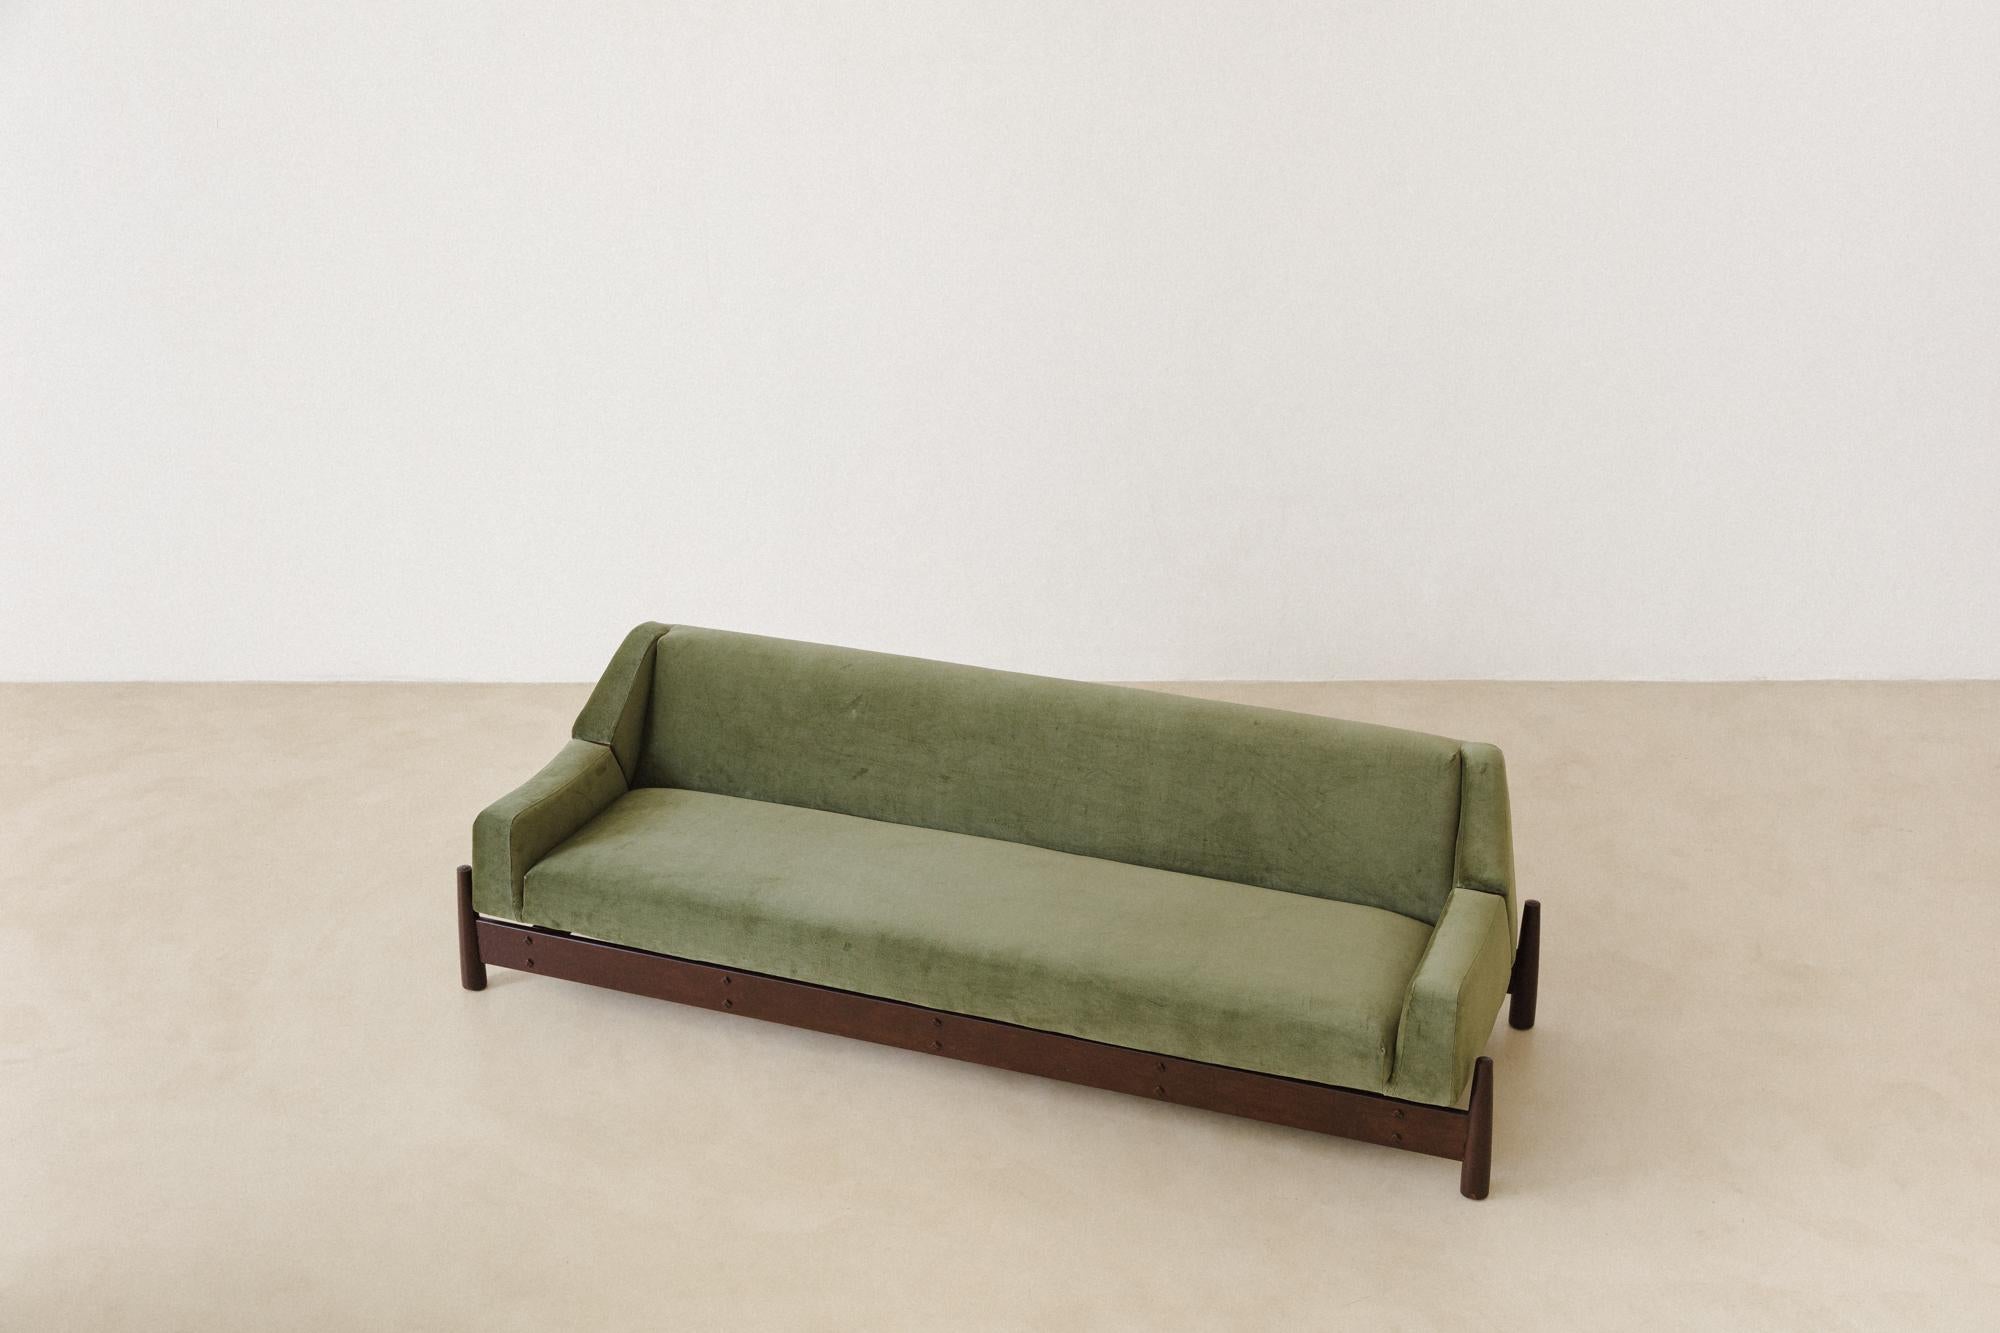 This Imbuia sofa reupholstered in a stunning velvet was manufactured in the 1960s by the Brazilian company Móveis Cimo, a pioneer in Brazilian furniture industrialization. 

Cimo Sofa is very charming, presenting the seat and backrest as a single